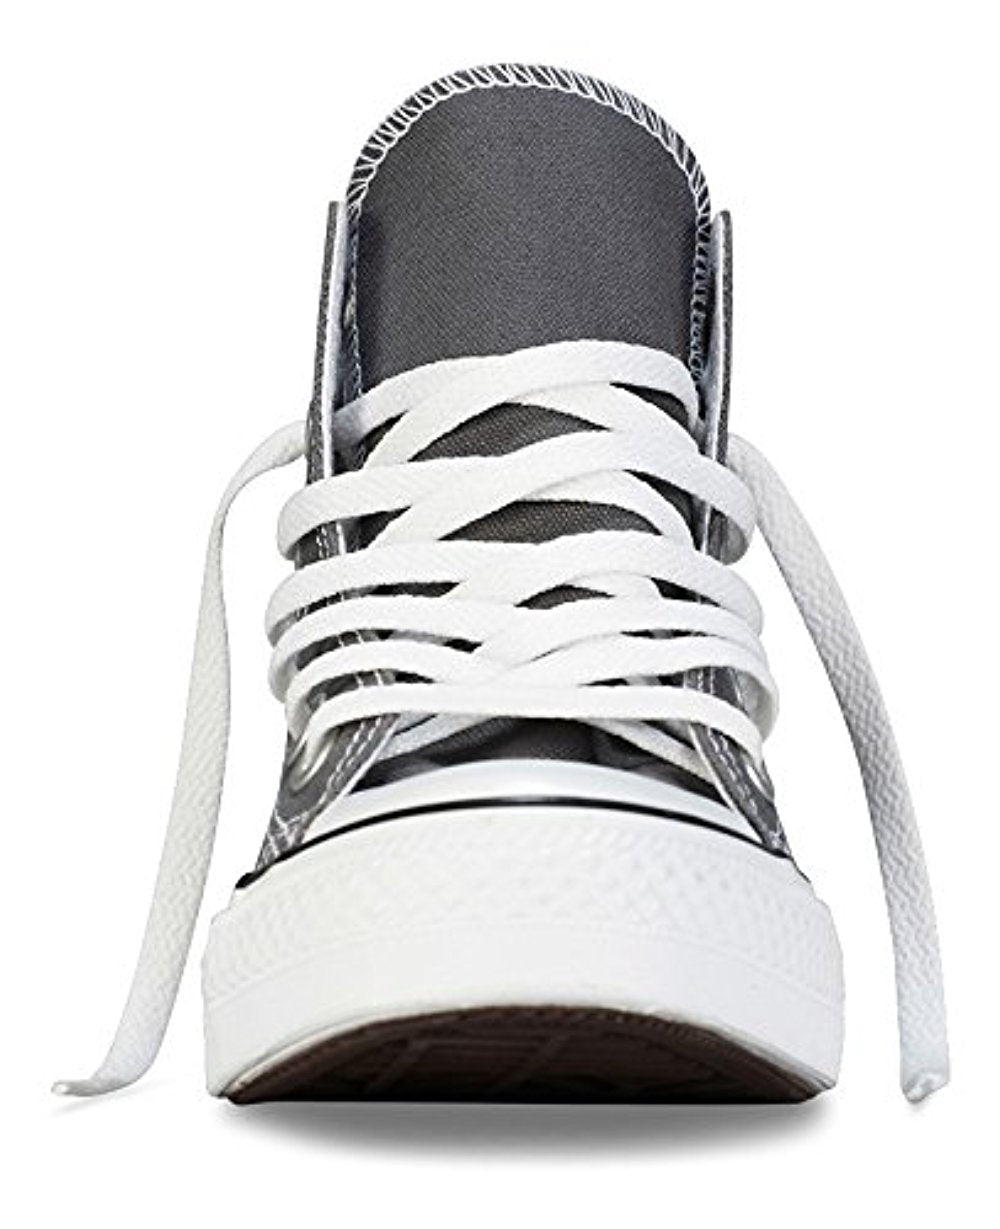 Converse Unisex Chuck Taylor All Star High Top Charcoal 10